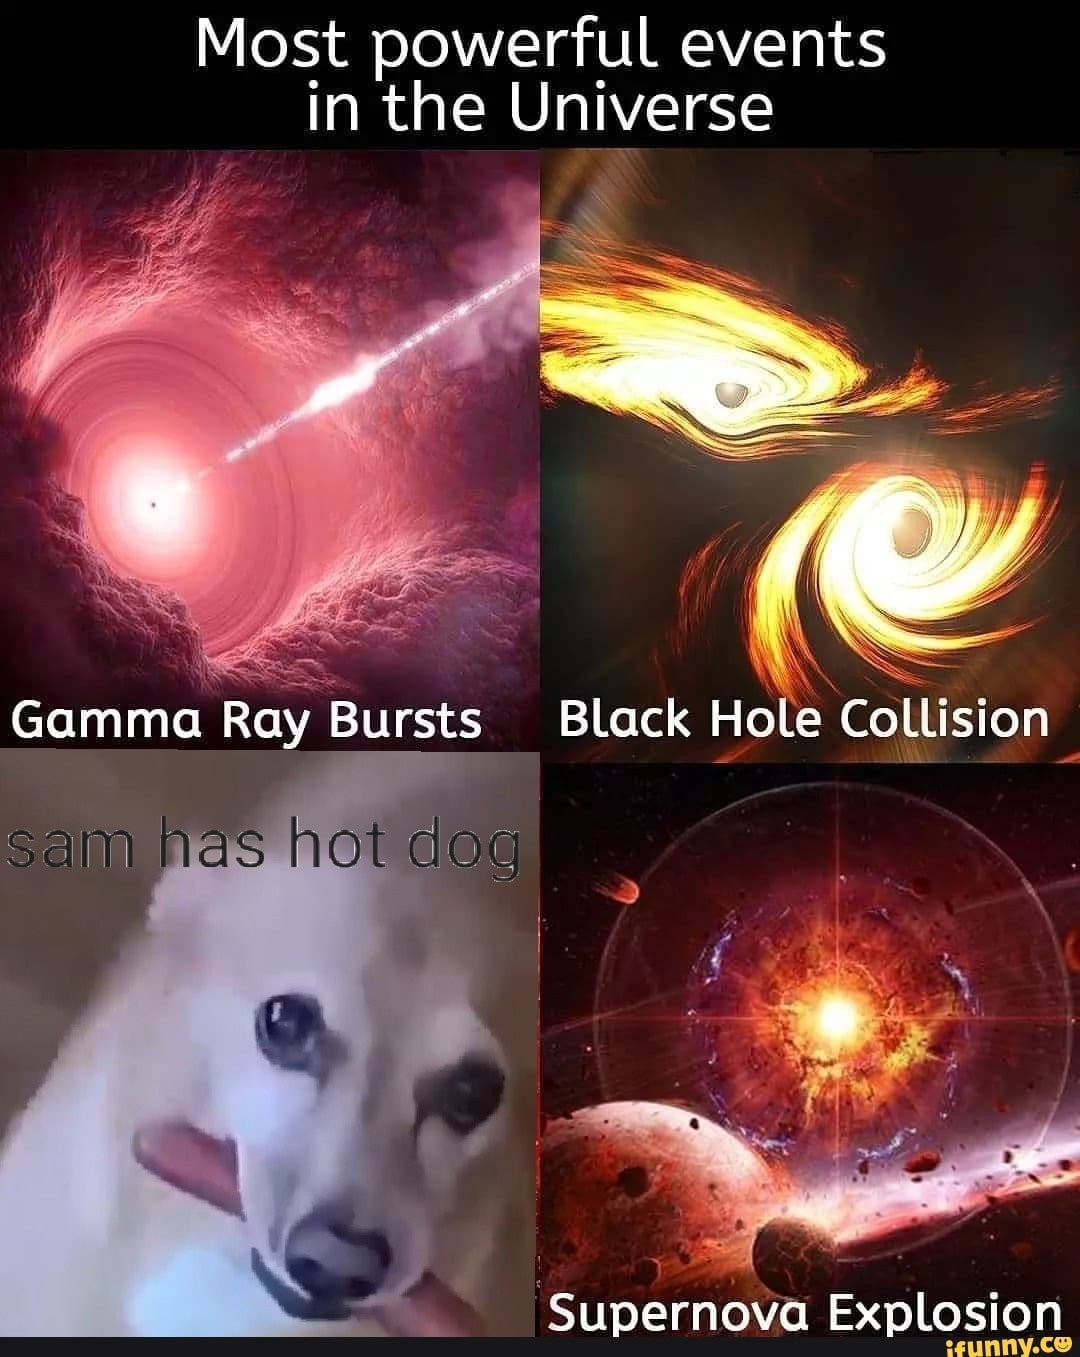 Most powerful events in the Universe Gamma Ray Bursts Black Hole Collision sam has hot dog Supernova Explosion - iFunny